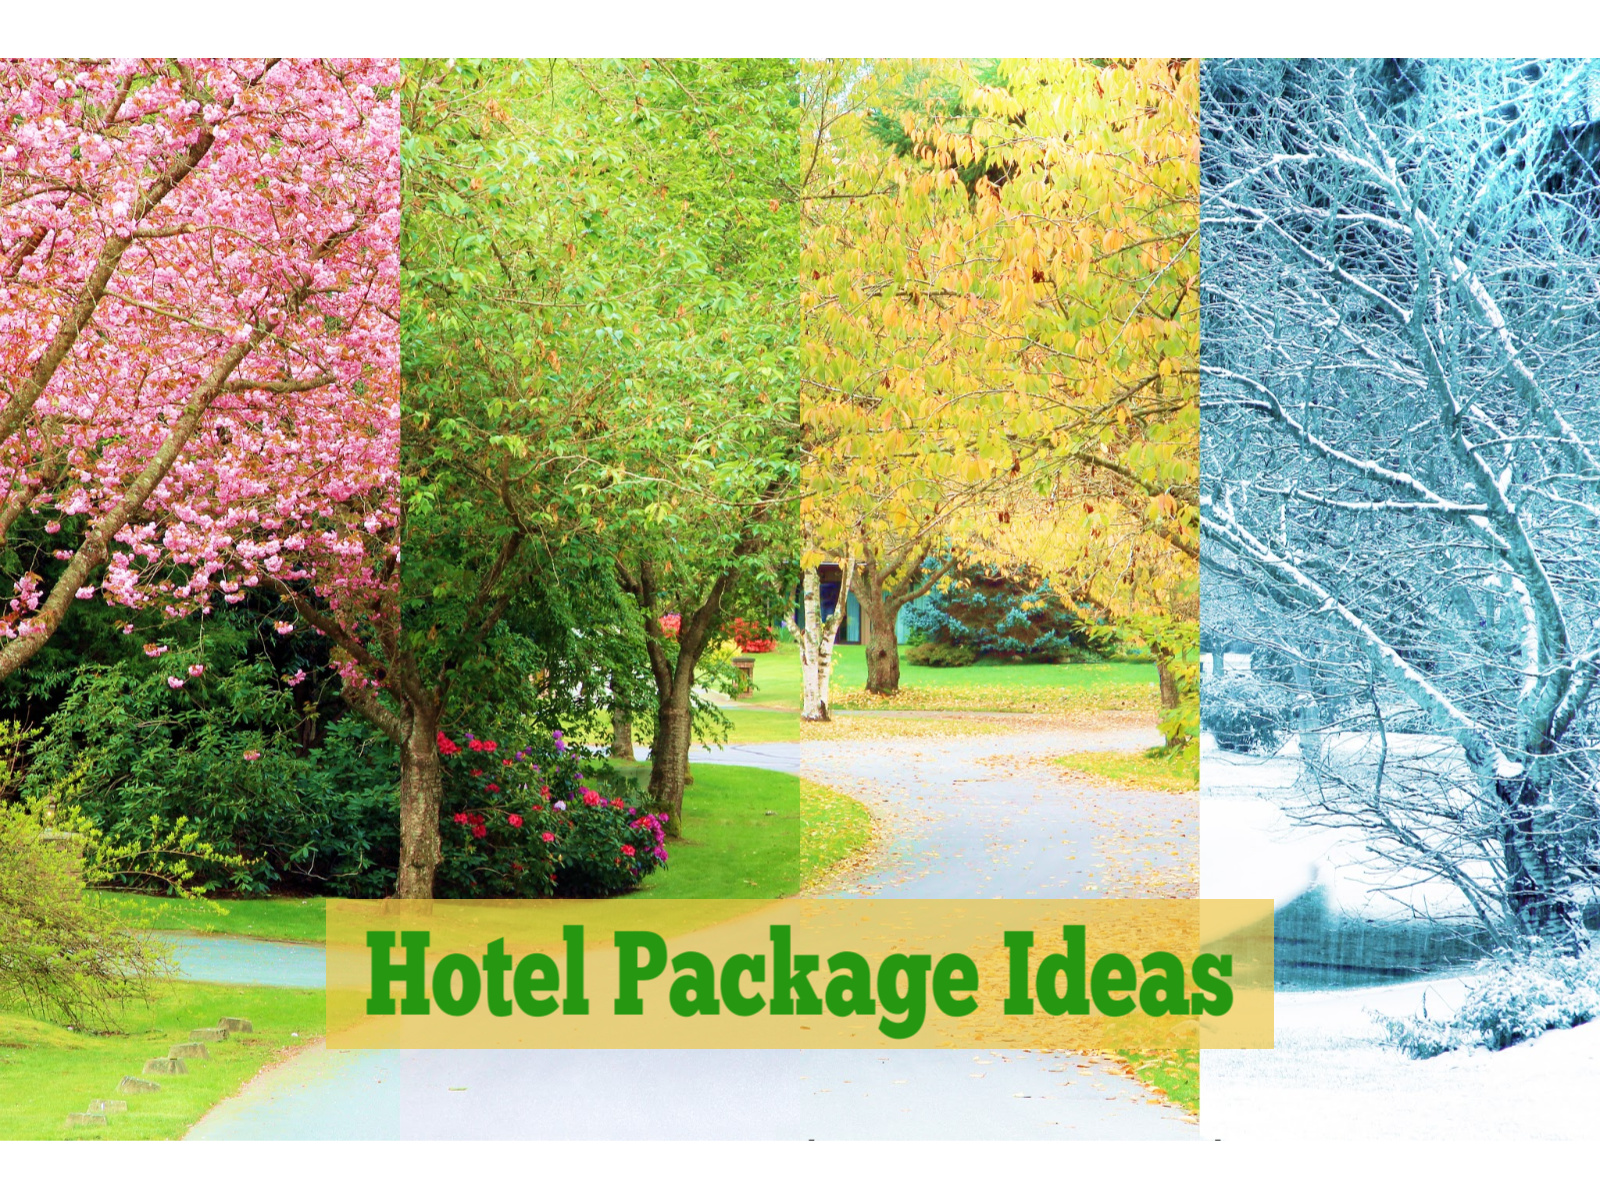 Hotel Packages: Who, What, When, Why, Where